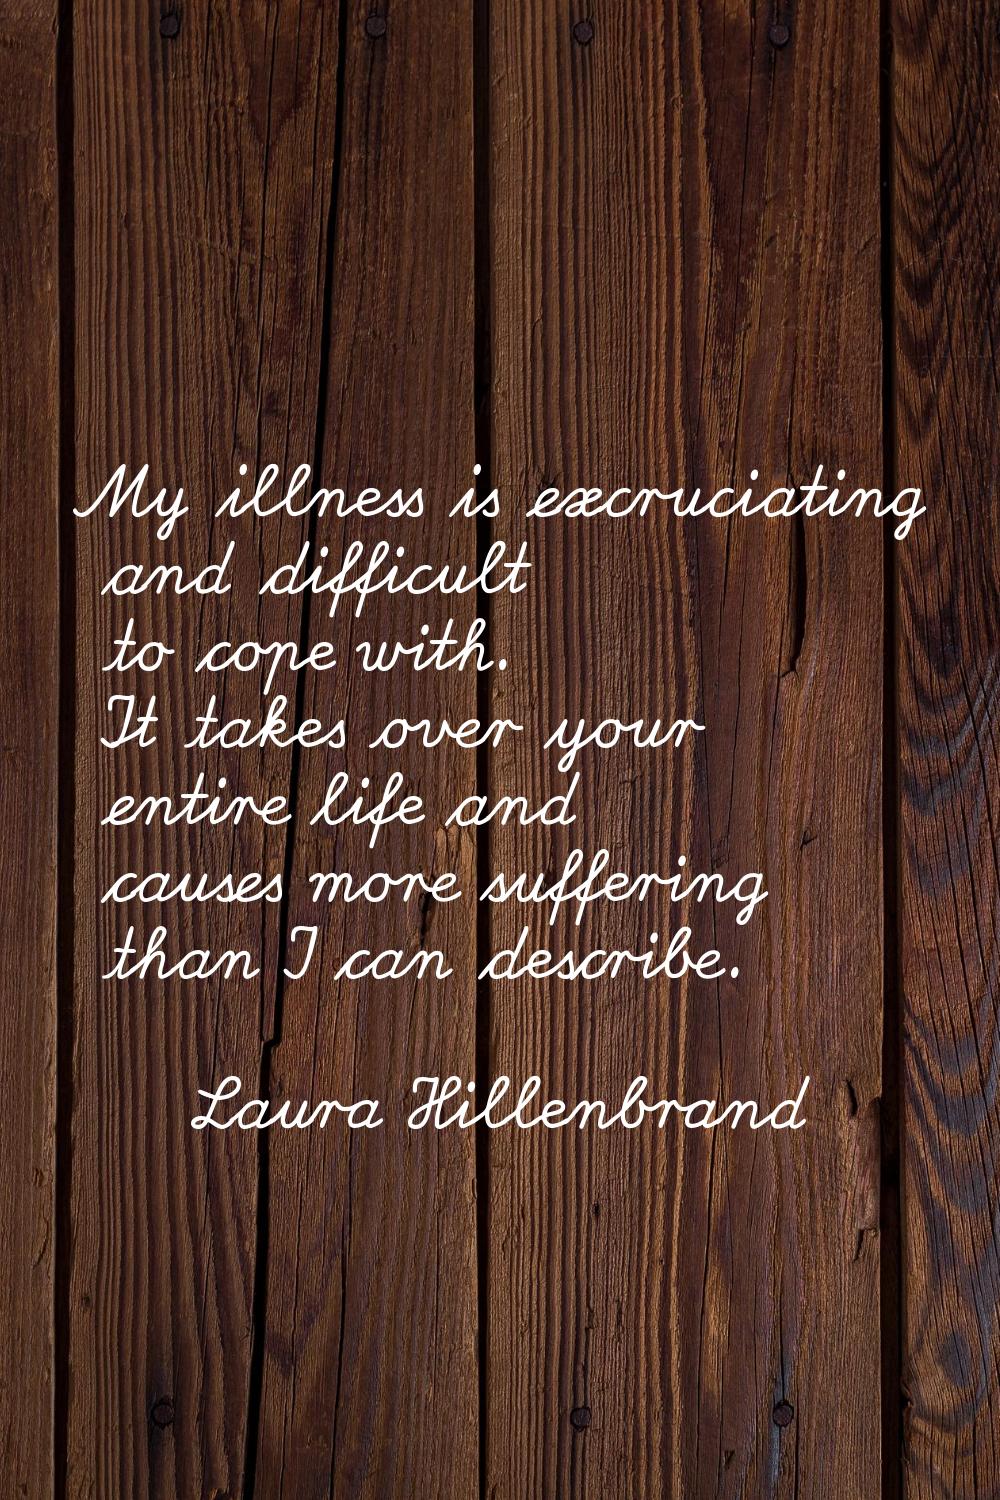 My illness is excruciating and difficult to cope with. It takes over your entire life and causes mo